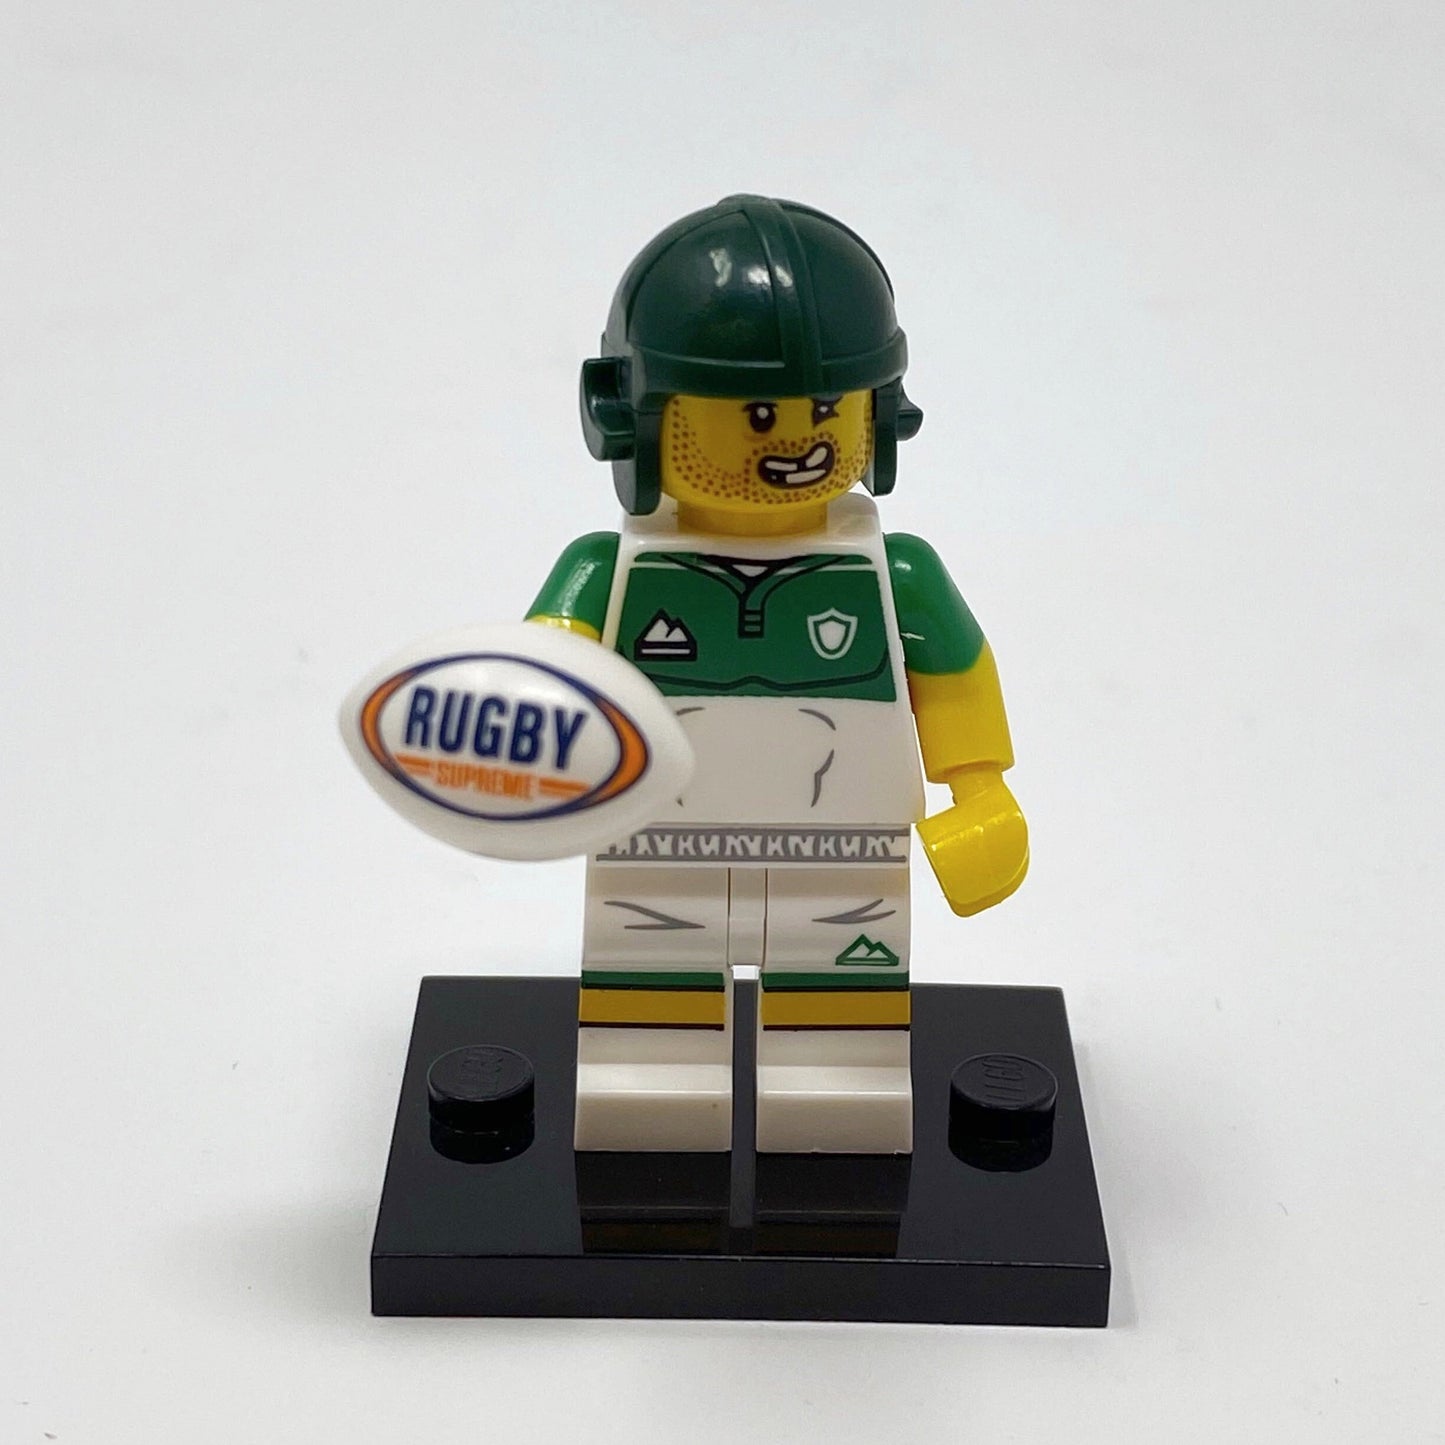 S19 Rugby Player - Series 19 Minifigure (col354)